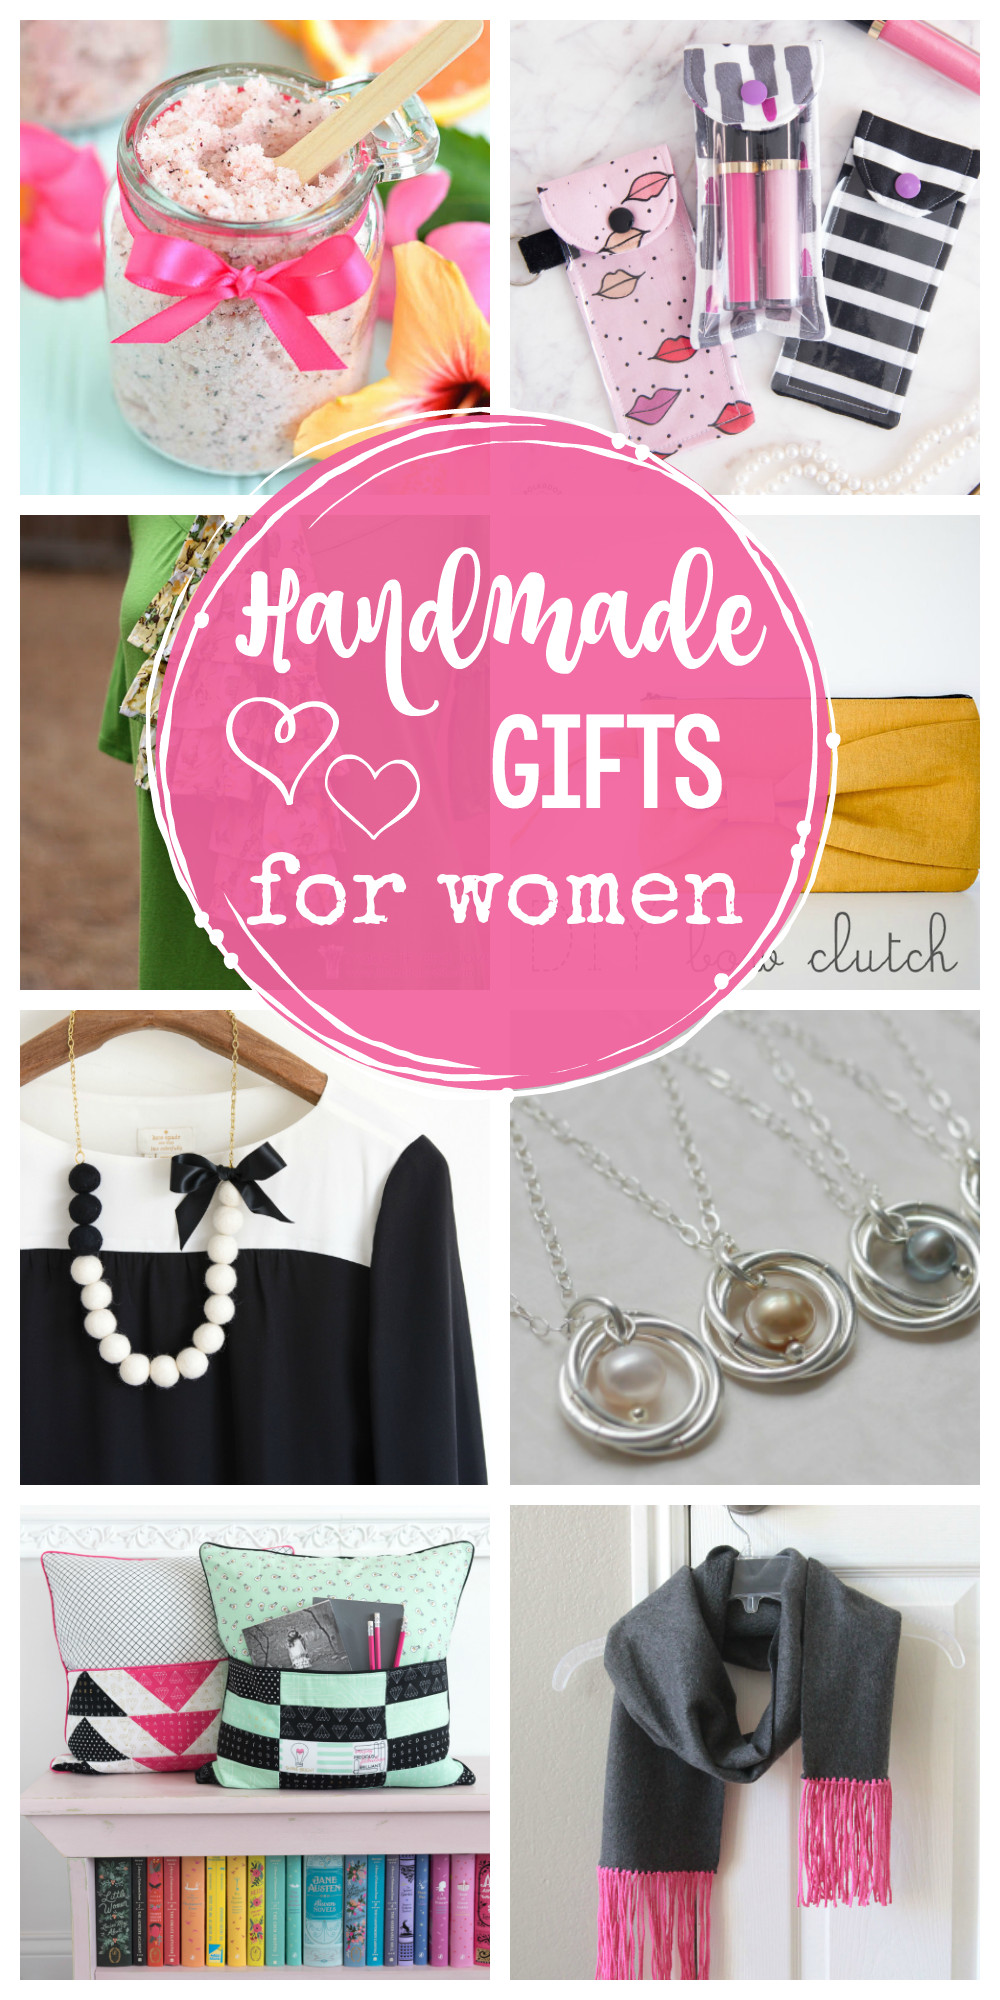 Handmade Birthday Gift Ideas
 25 Great Handmade Gifts for Women Crazy Little Projects